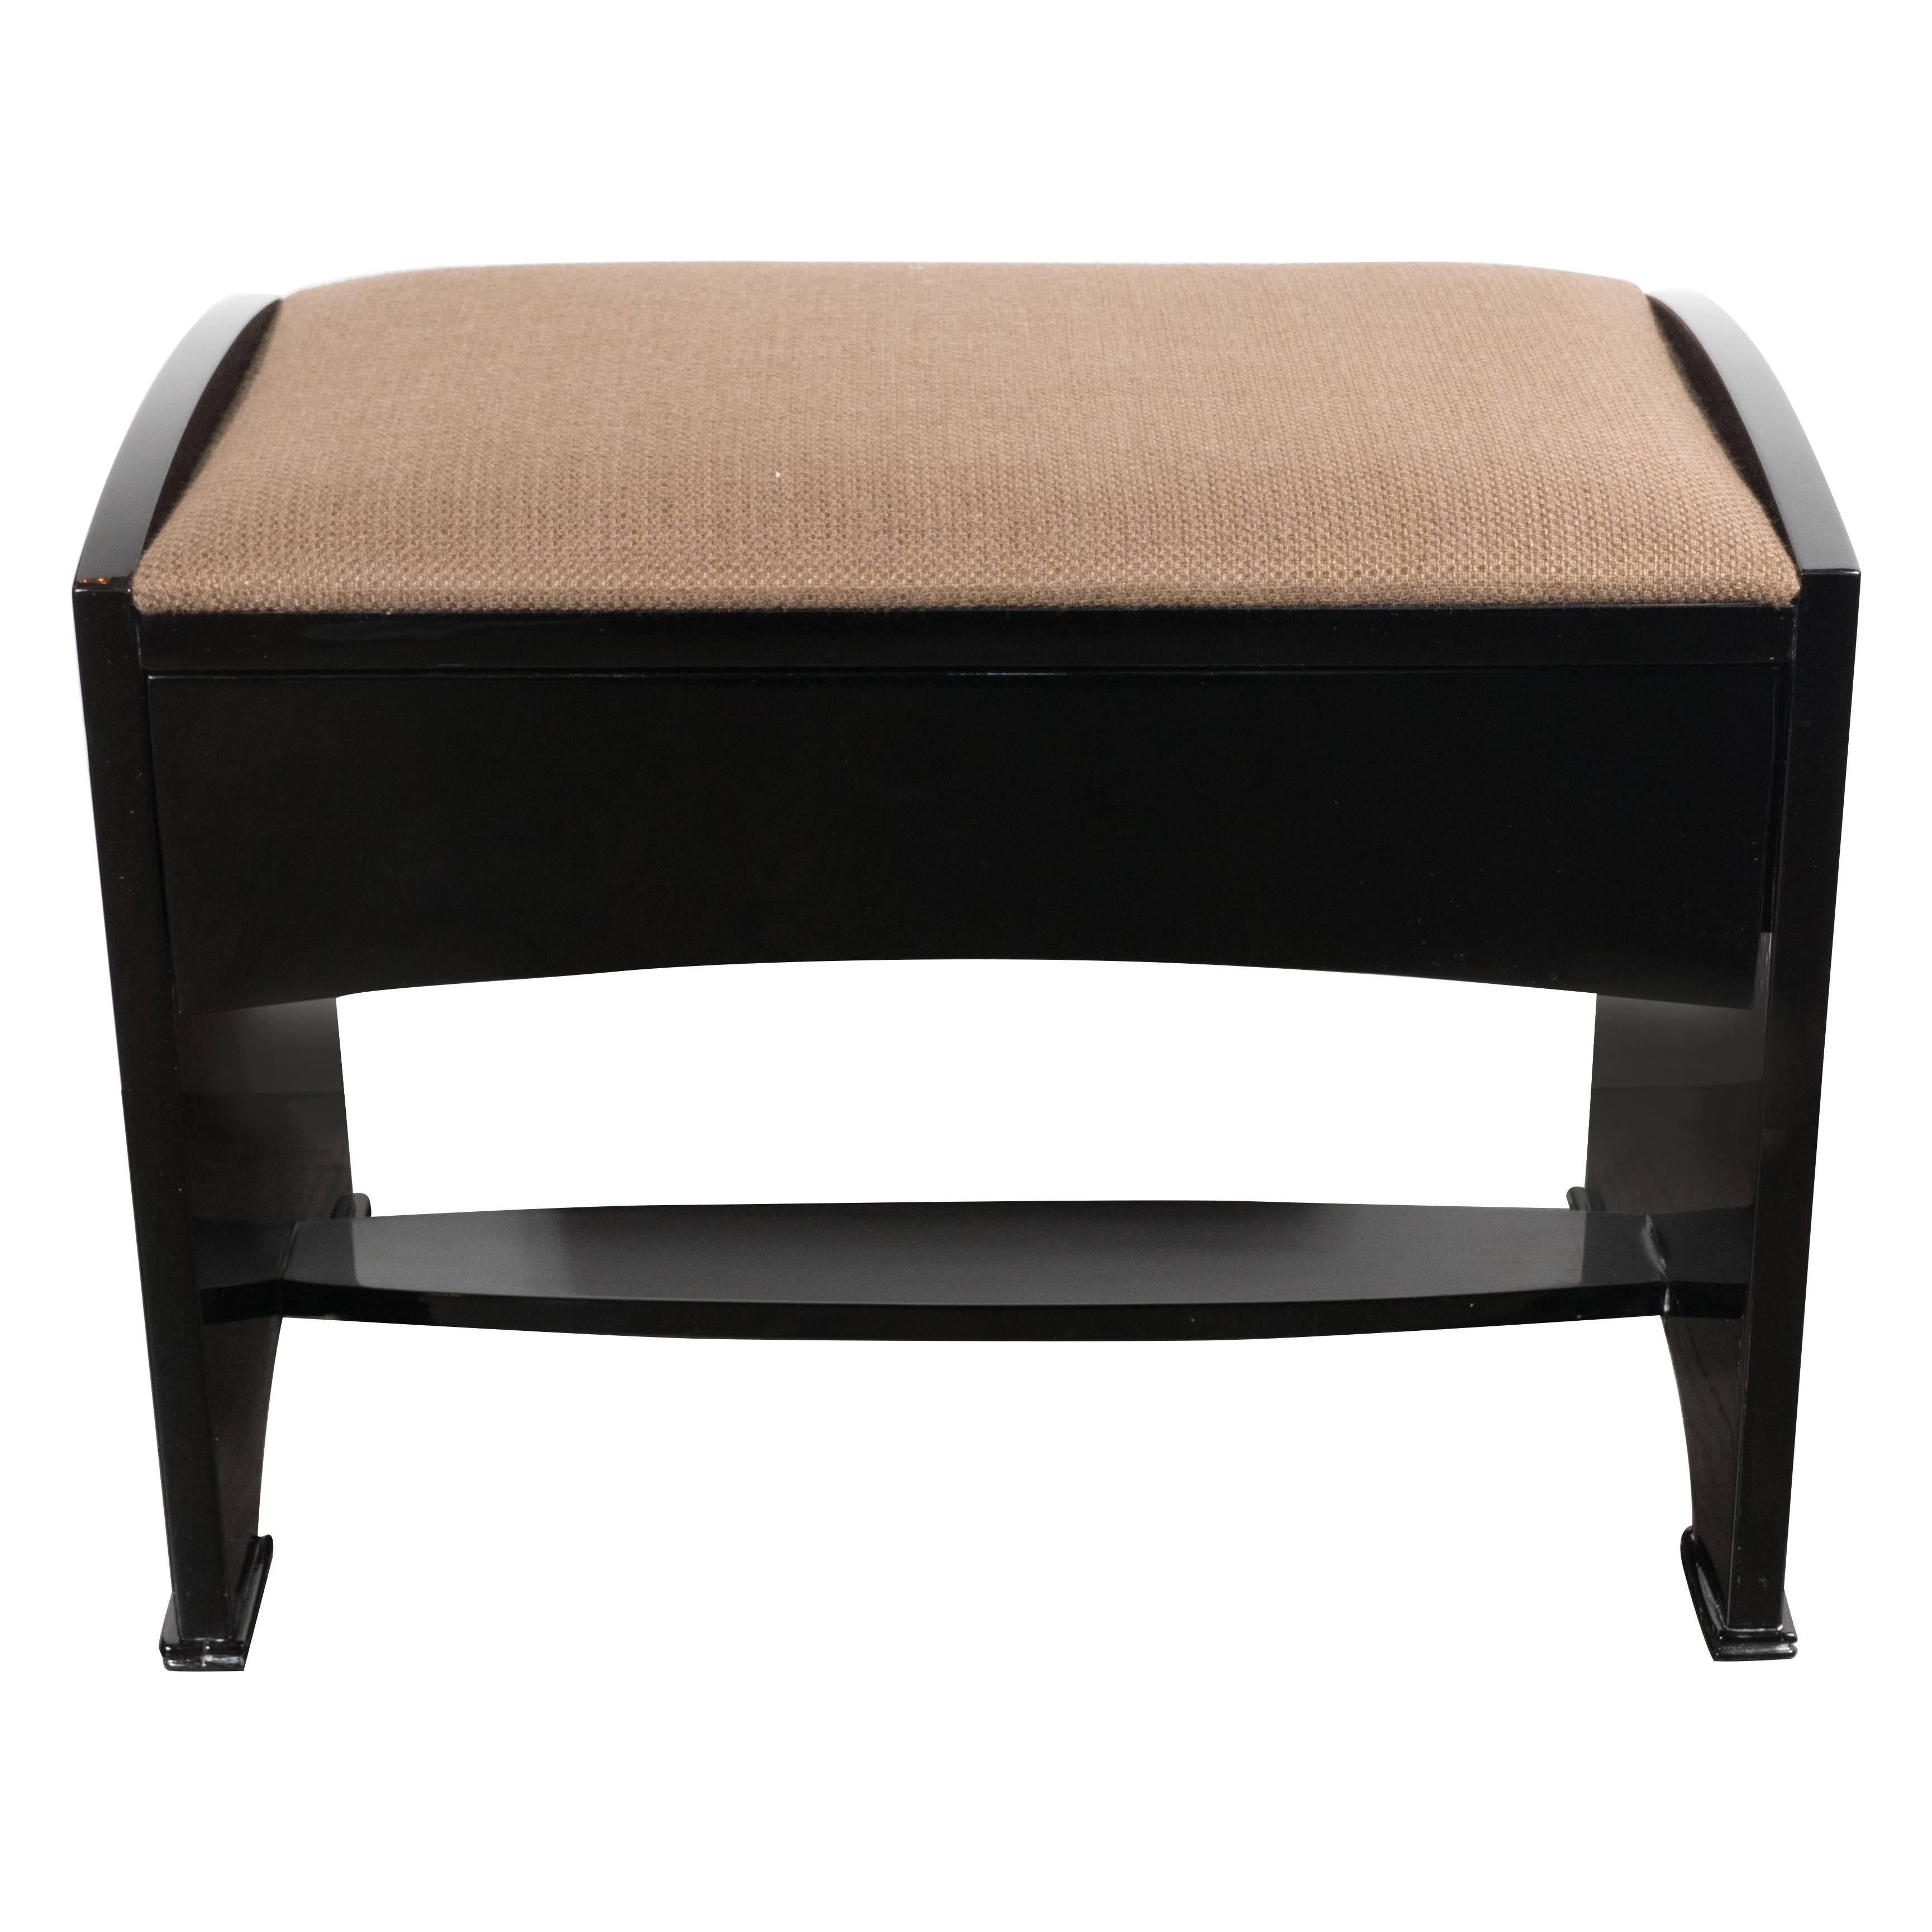 American Art Deco Bench in Black Lacquer with Textured Tawny Brown Upholstery